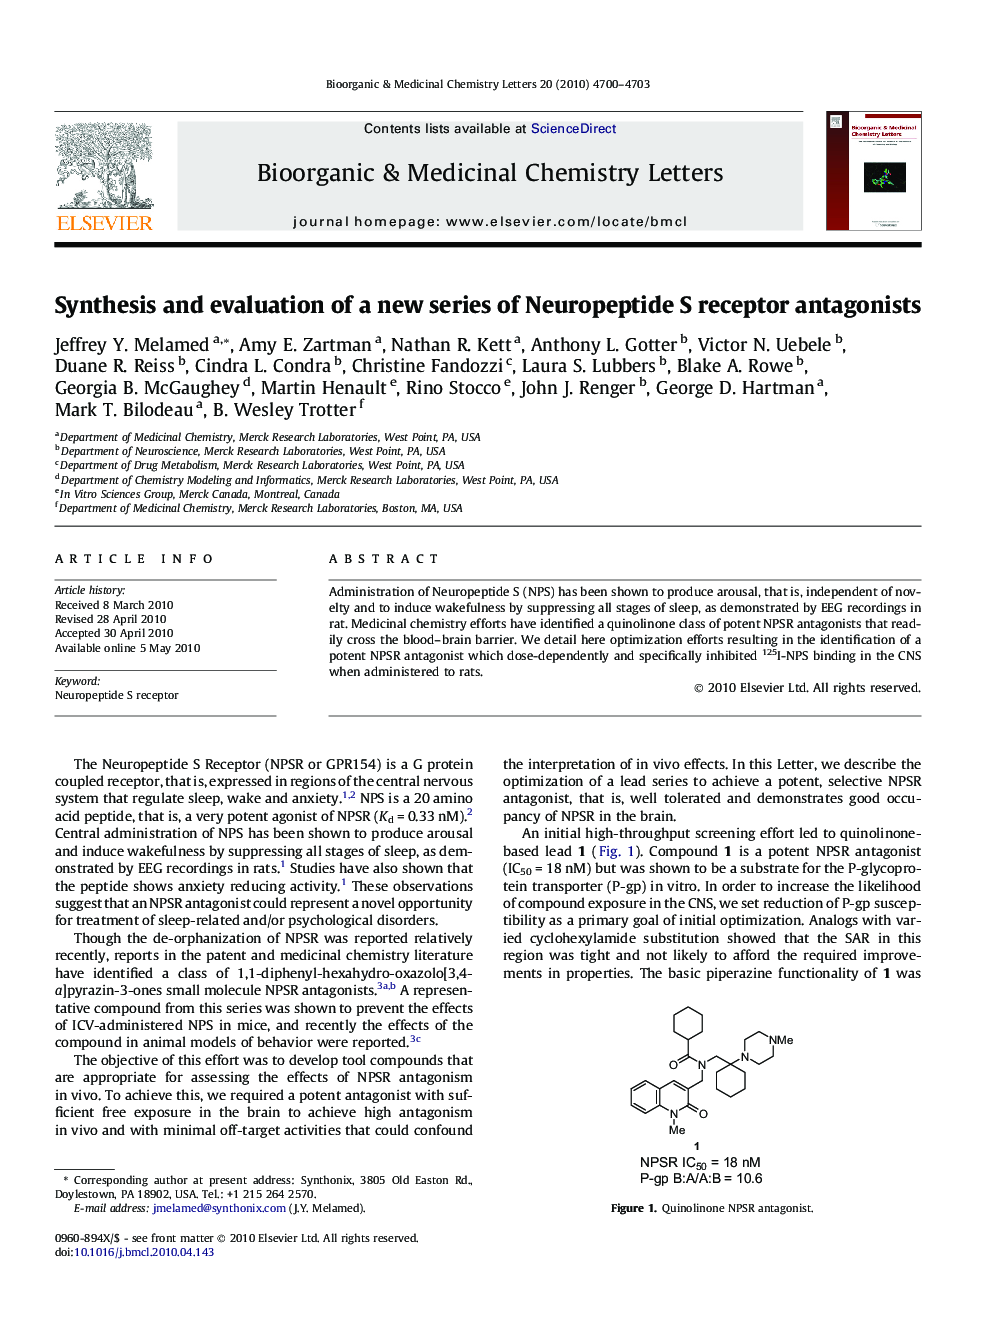 Synthesis and evaluation of a new series of Neuropeptide S receptor antagonists